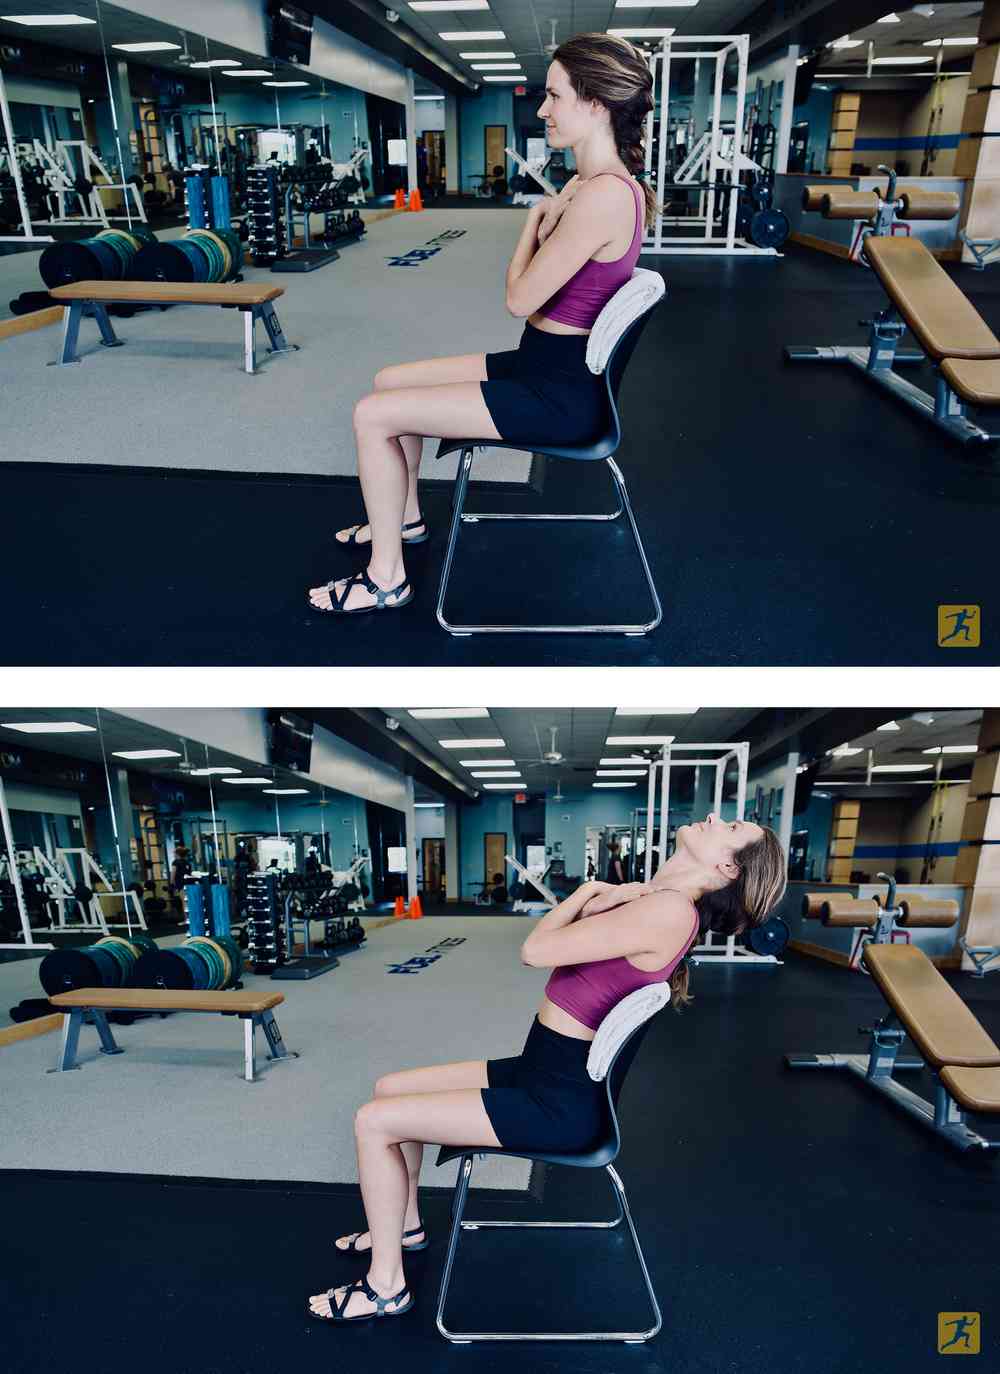 The starting and ending positions of a thoracic extension exercise